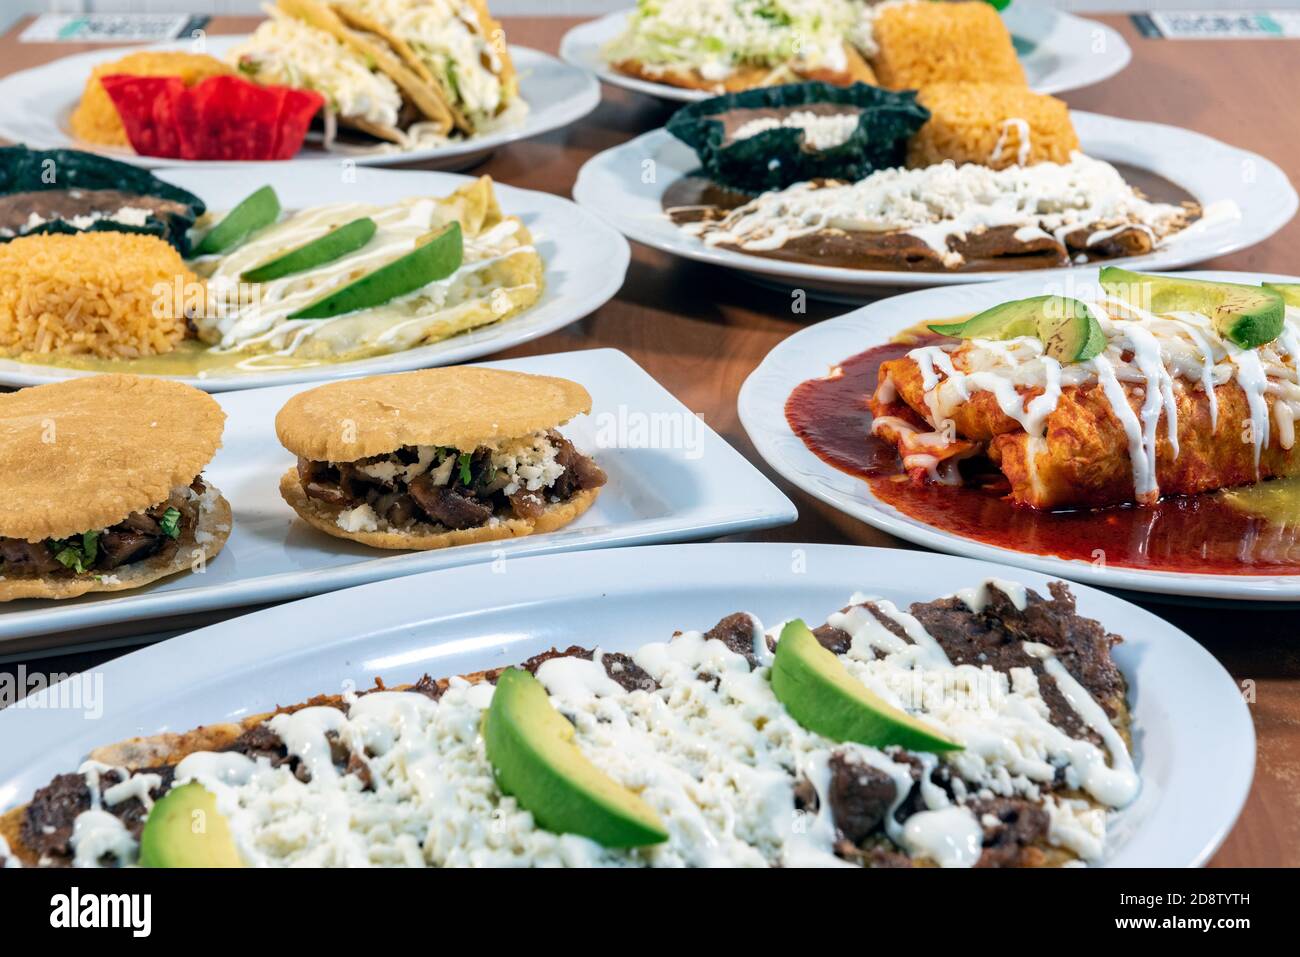 Buffet table of authentic Mexican food plates with several different flavors and styles to choose from. Stock Photo